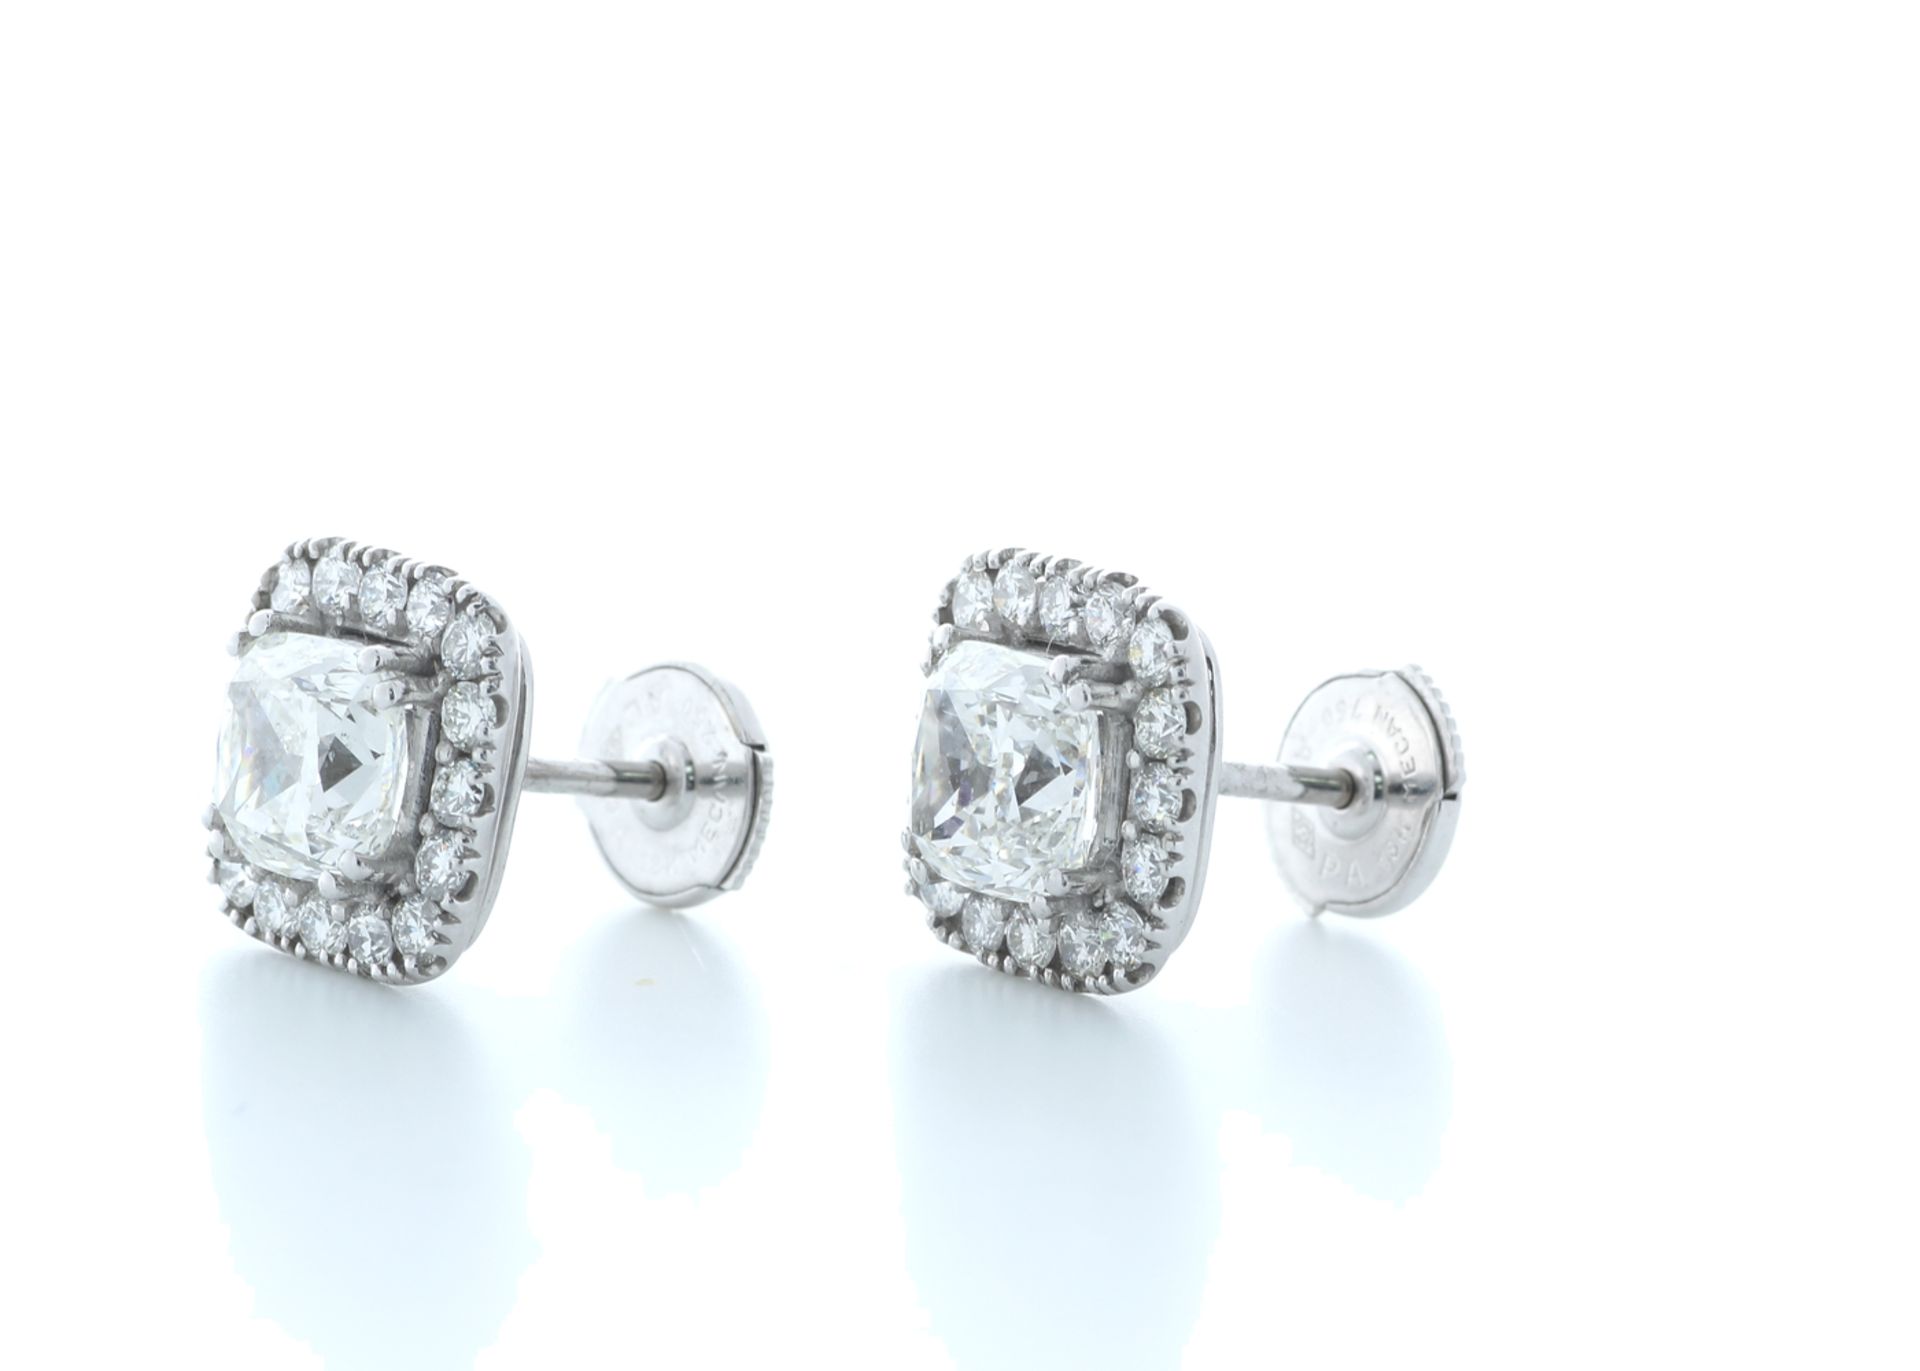 18ct White Gold Cushion Cut Diamond Halo Earrings 3.40 Carats - Valued by IDI £93,750.00 - 18ct - Image 3 of 4